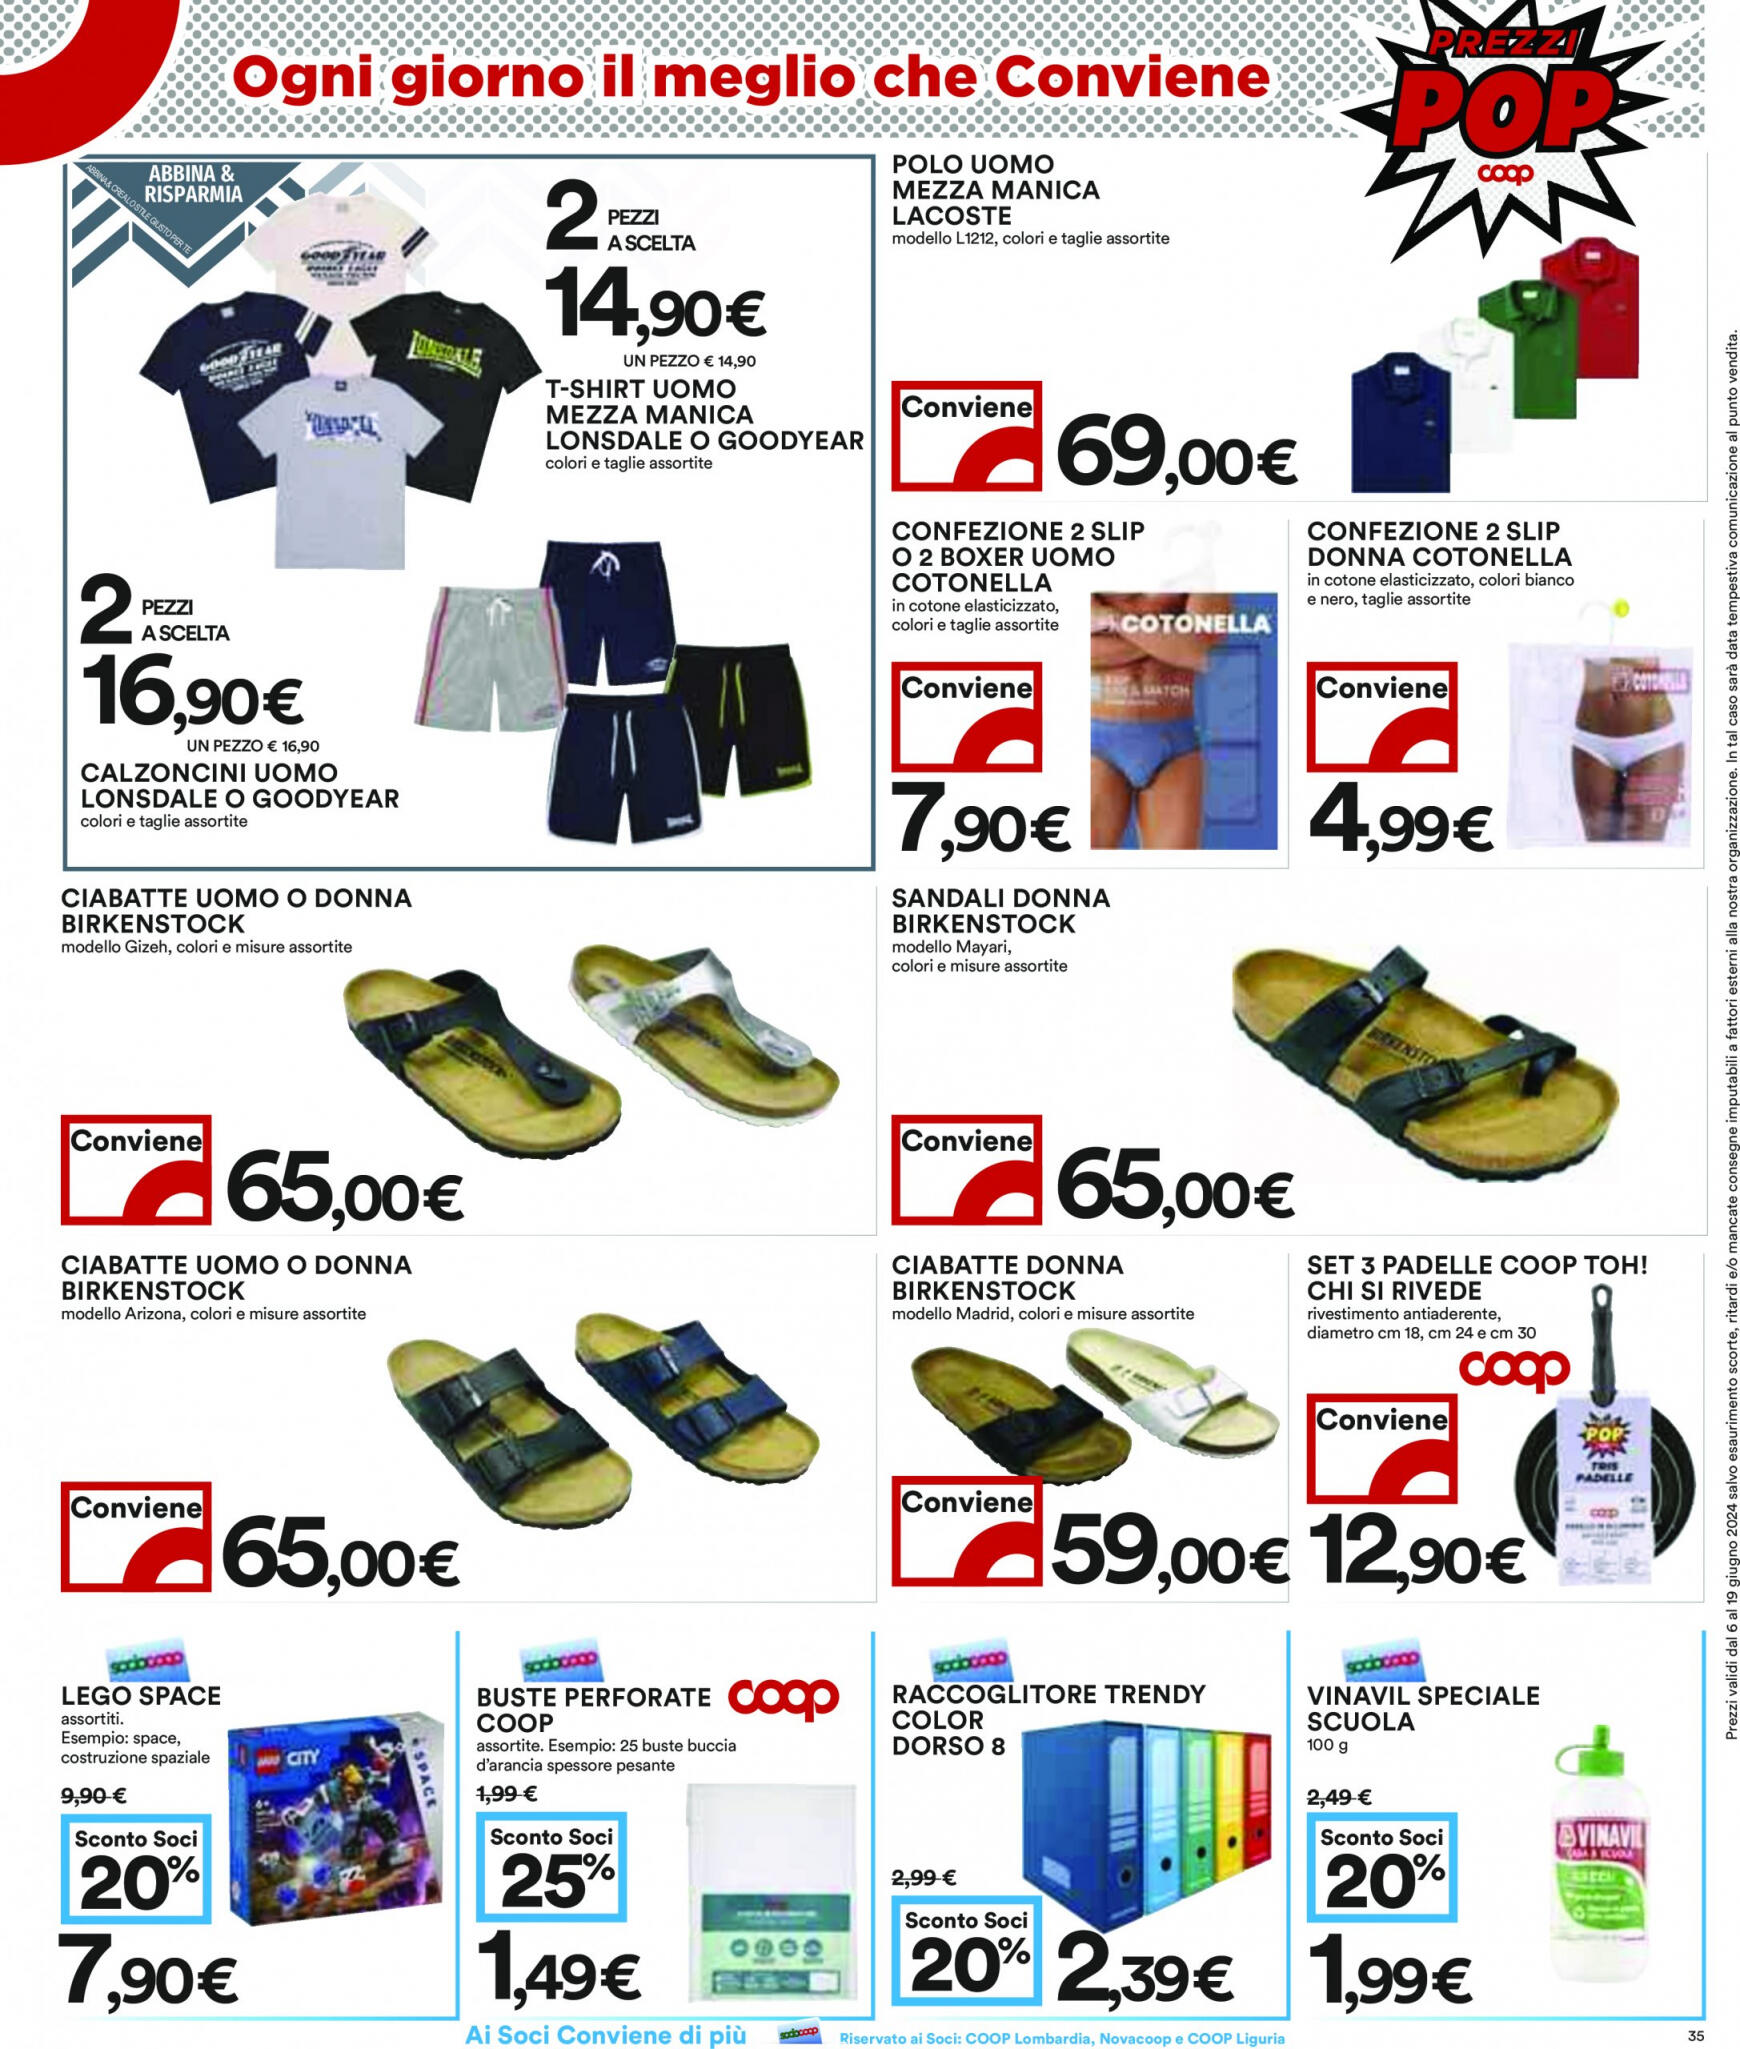 coop - Nuovo volantino Coop 10.06. - 19.06. - page: 35